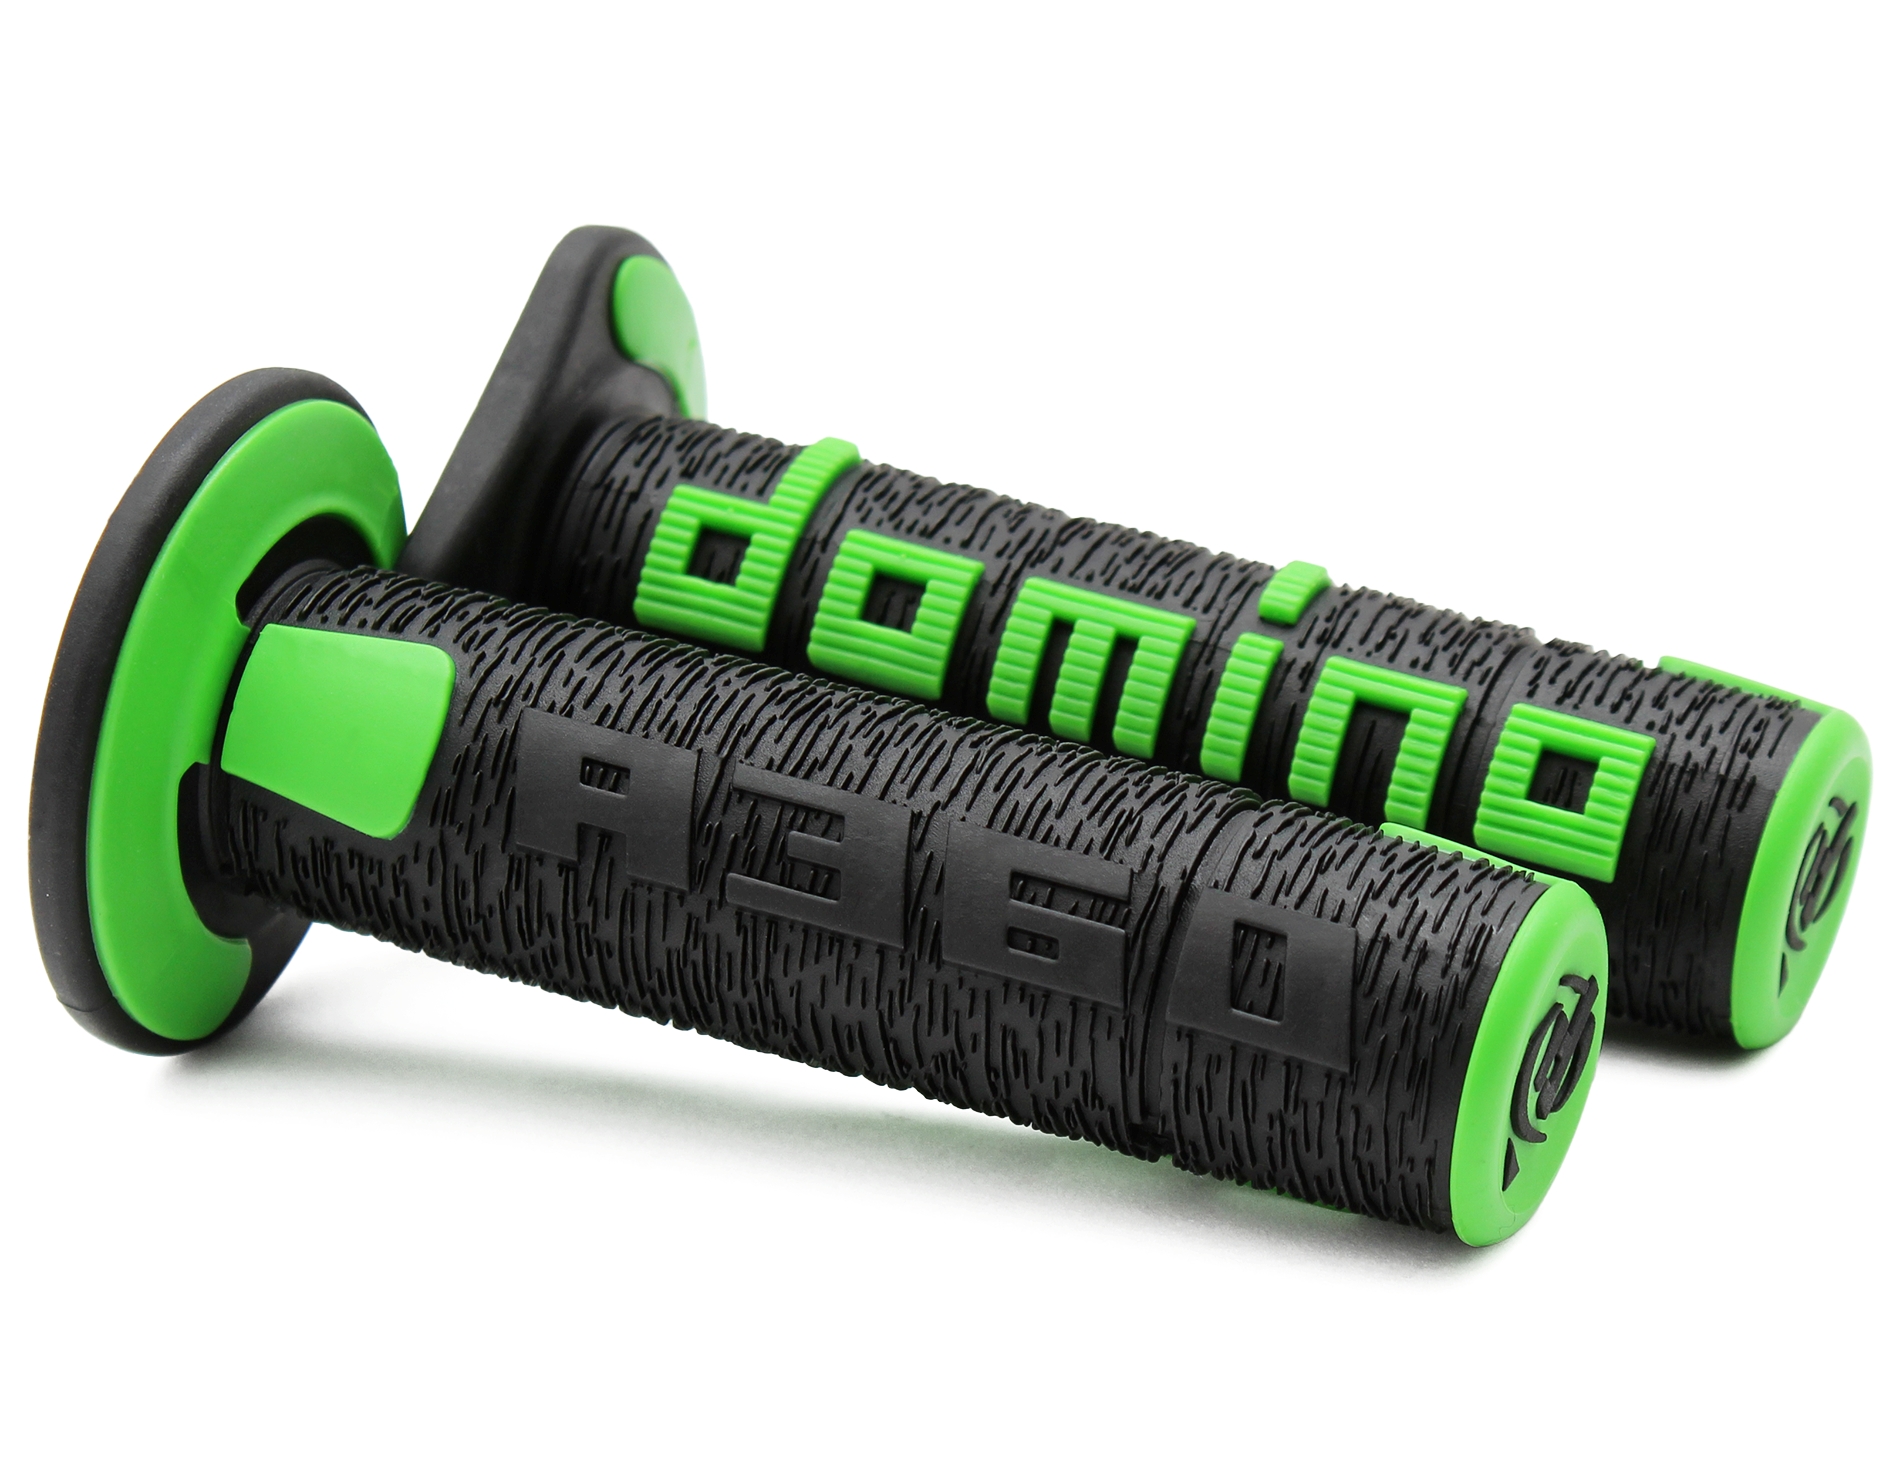 BLACK/GREEN OFF-ROAD GRIPS A36041C4044A7-0 | Domino Srl & Tommaselli